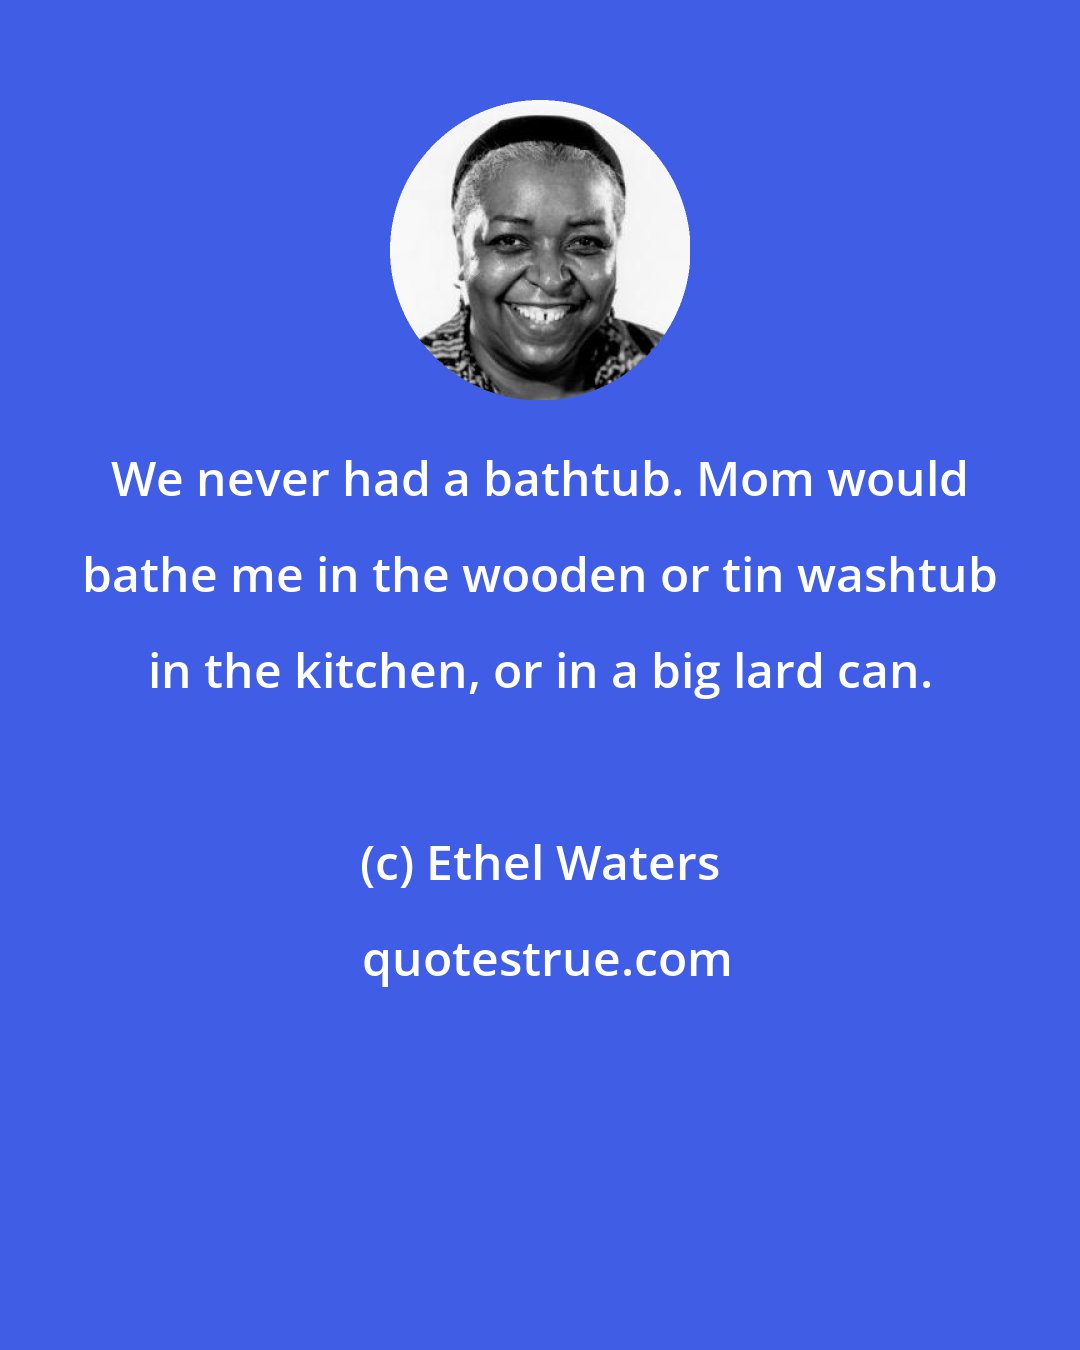 Ethel Waters: We never had a bathtub. Mom would bathe me in the wooden or tin washtub in the kitchen, or in a big lard can.